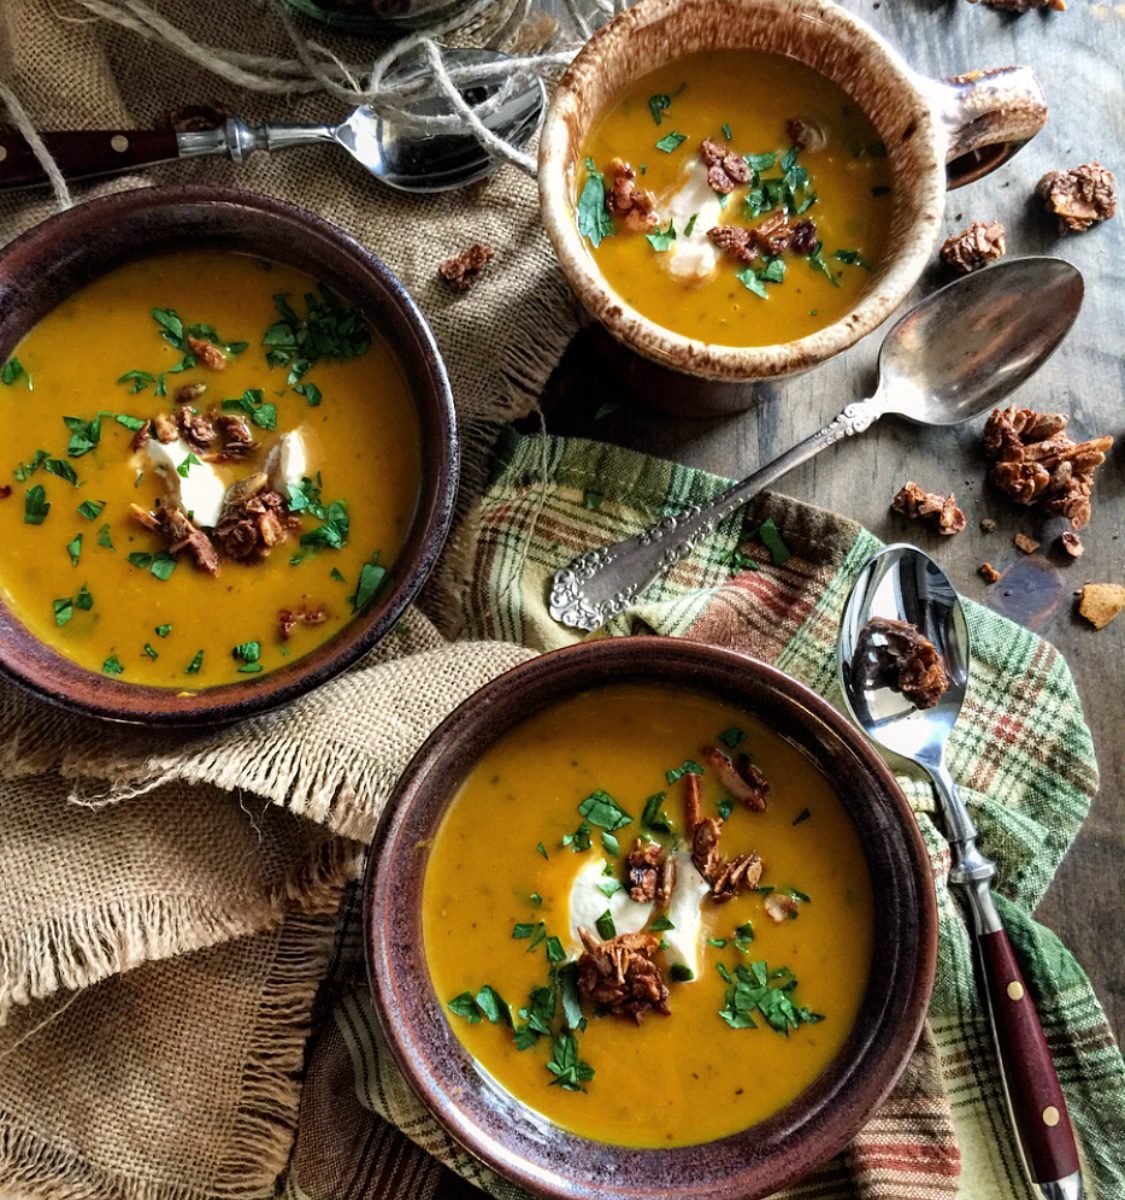 Curried Kabocha Squash Soup, easy to whip up and so cozy!